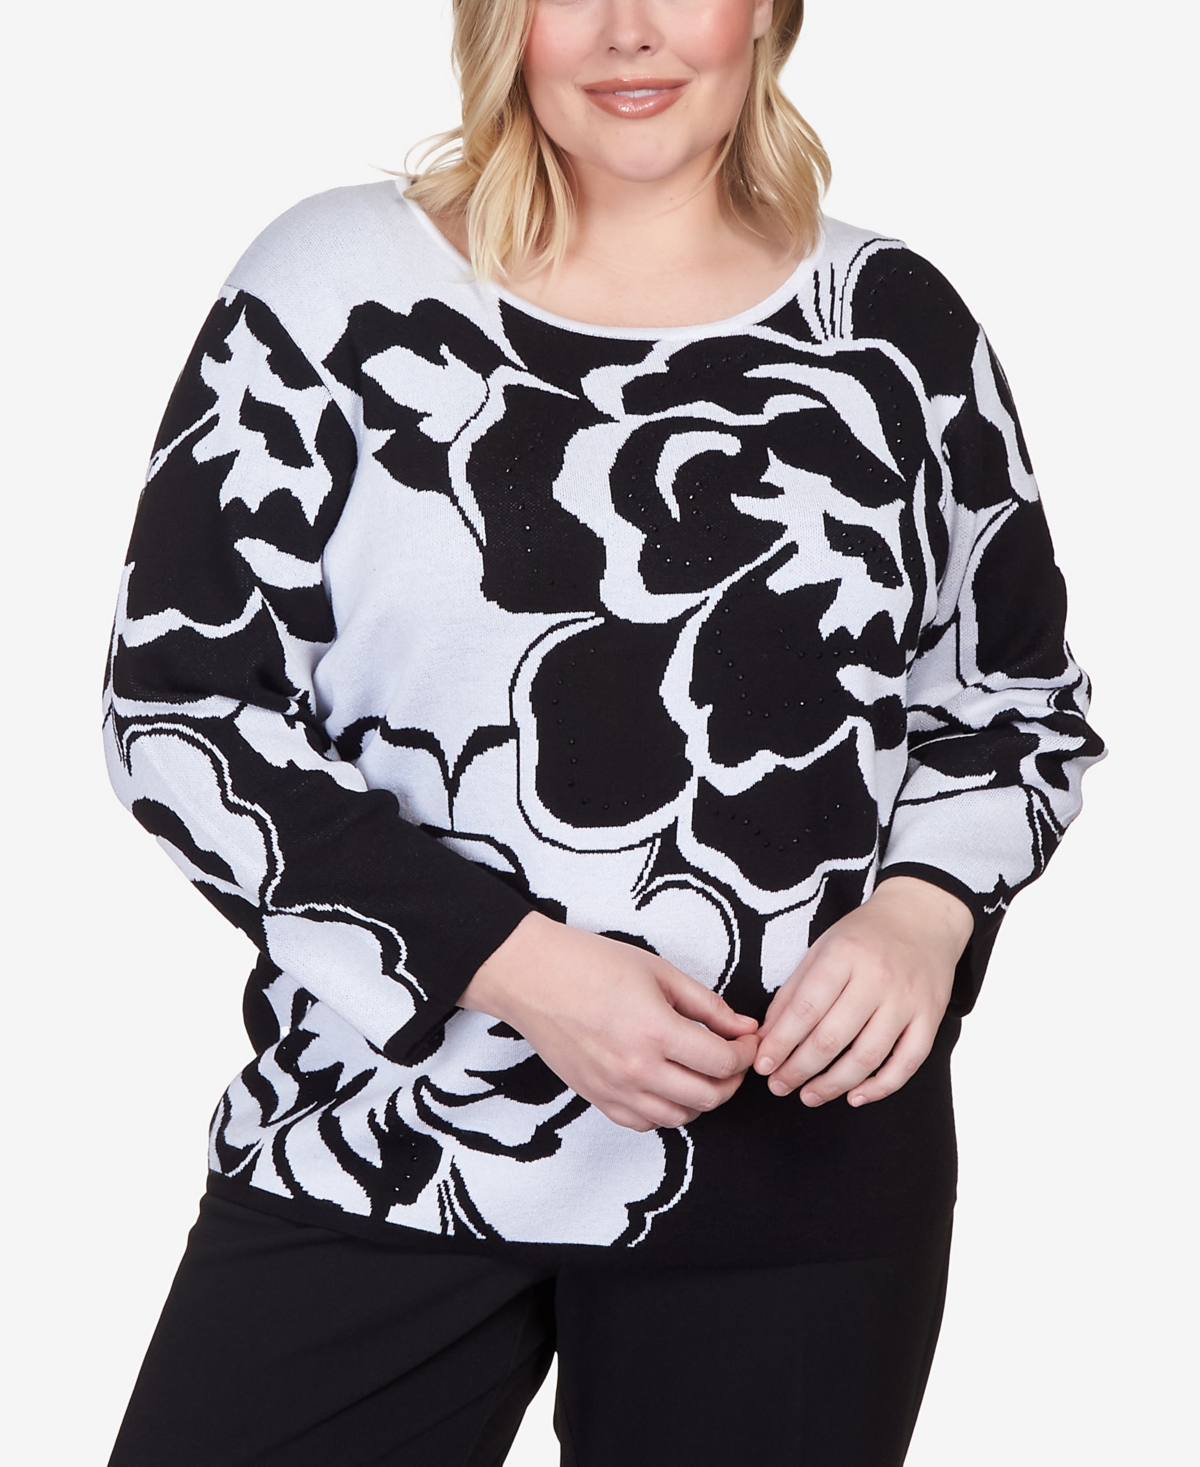 ALFRED DUNNER PLUS SIZE WORLD TRAVELER DRAMA FLORAL JACQUARD SCOOP NECK SWEATER